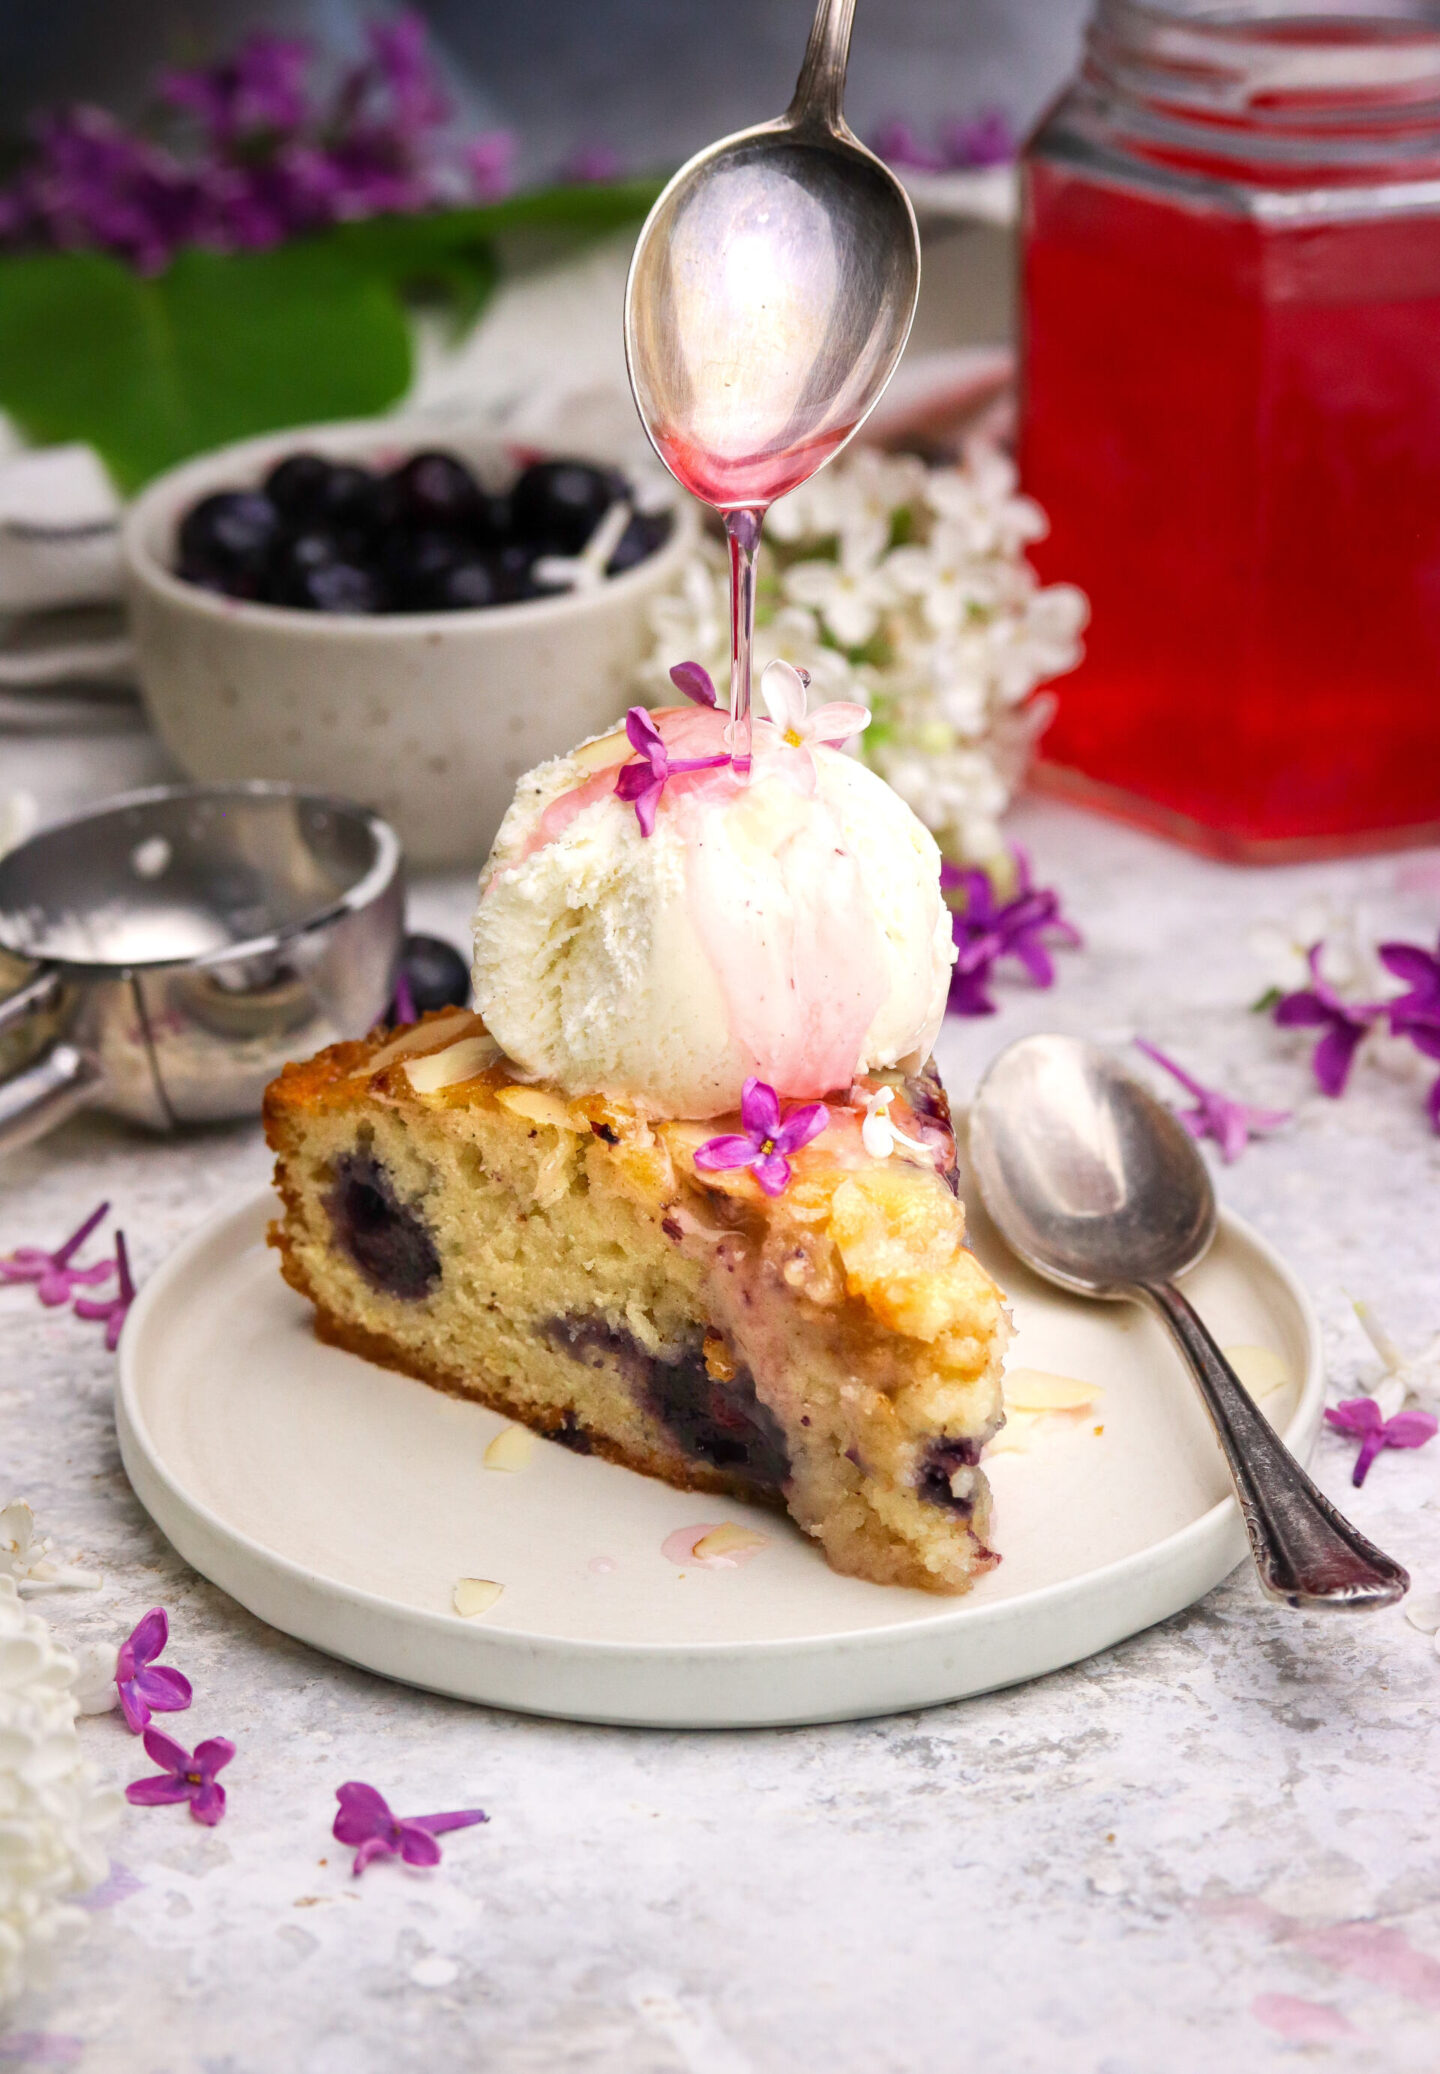 Blueberry & Cardamom Cake with Lilac Syrup